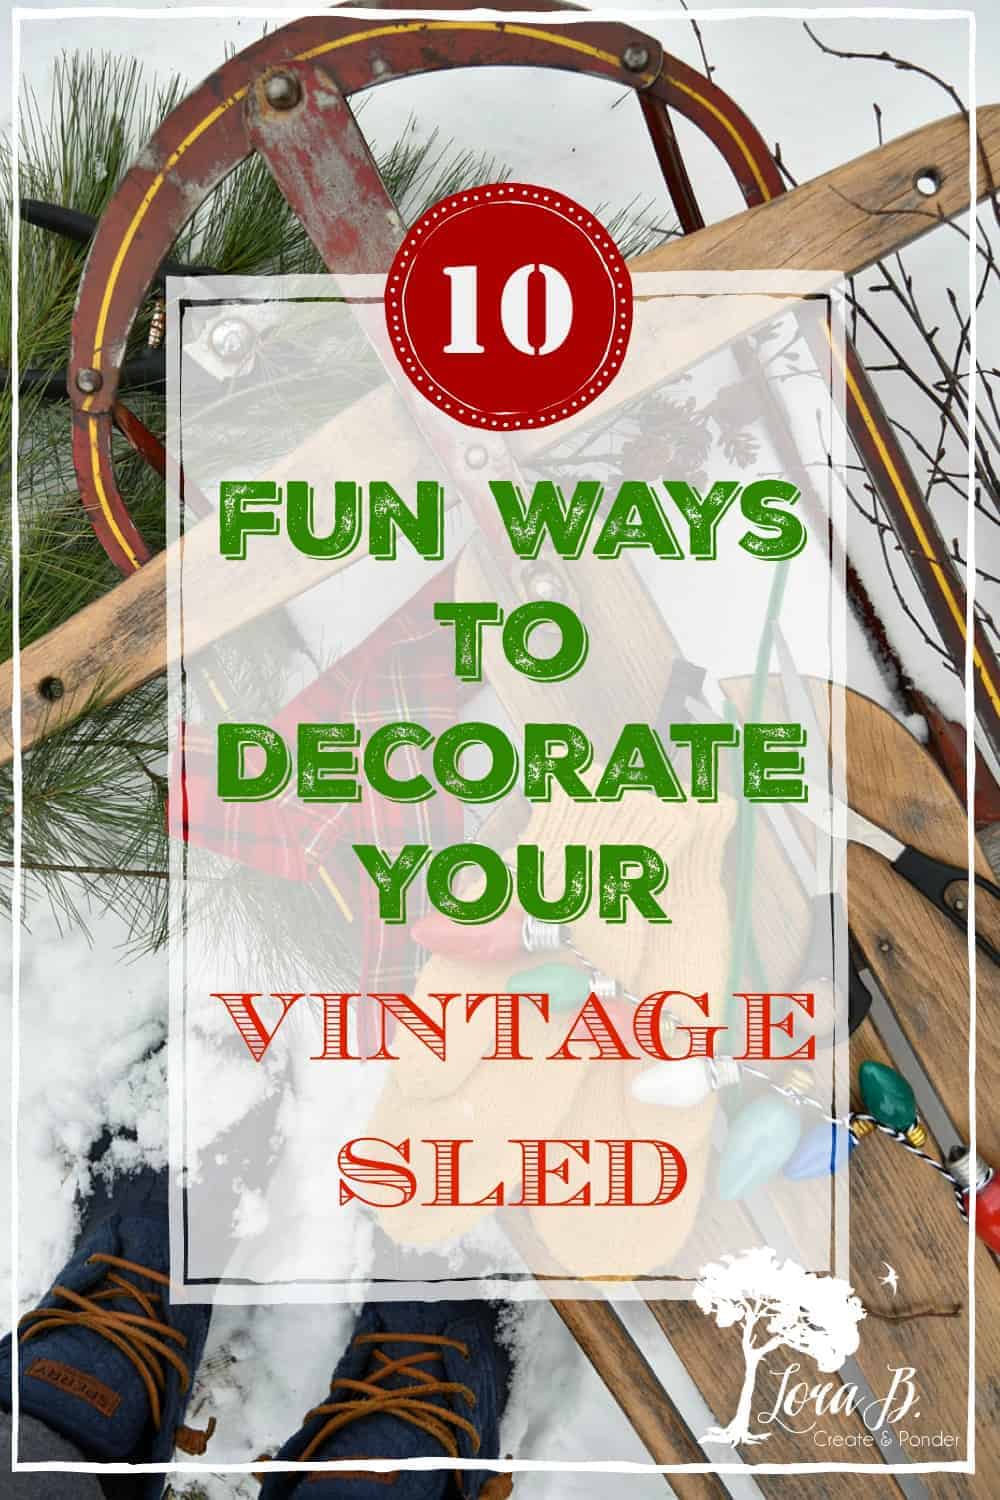 10 Creative Ways To Decorate a Vintage Sled